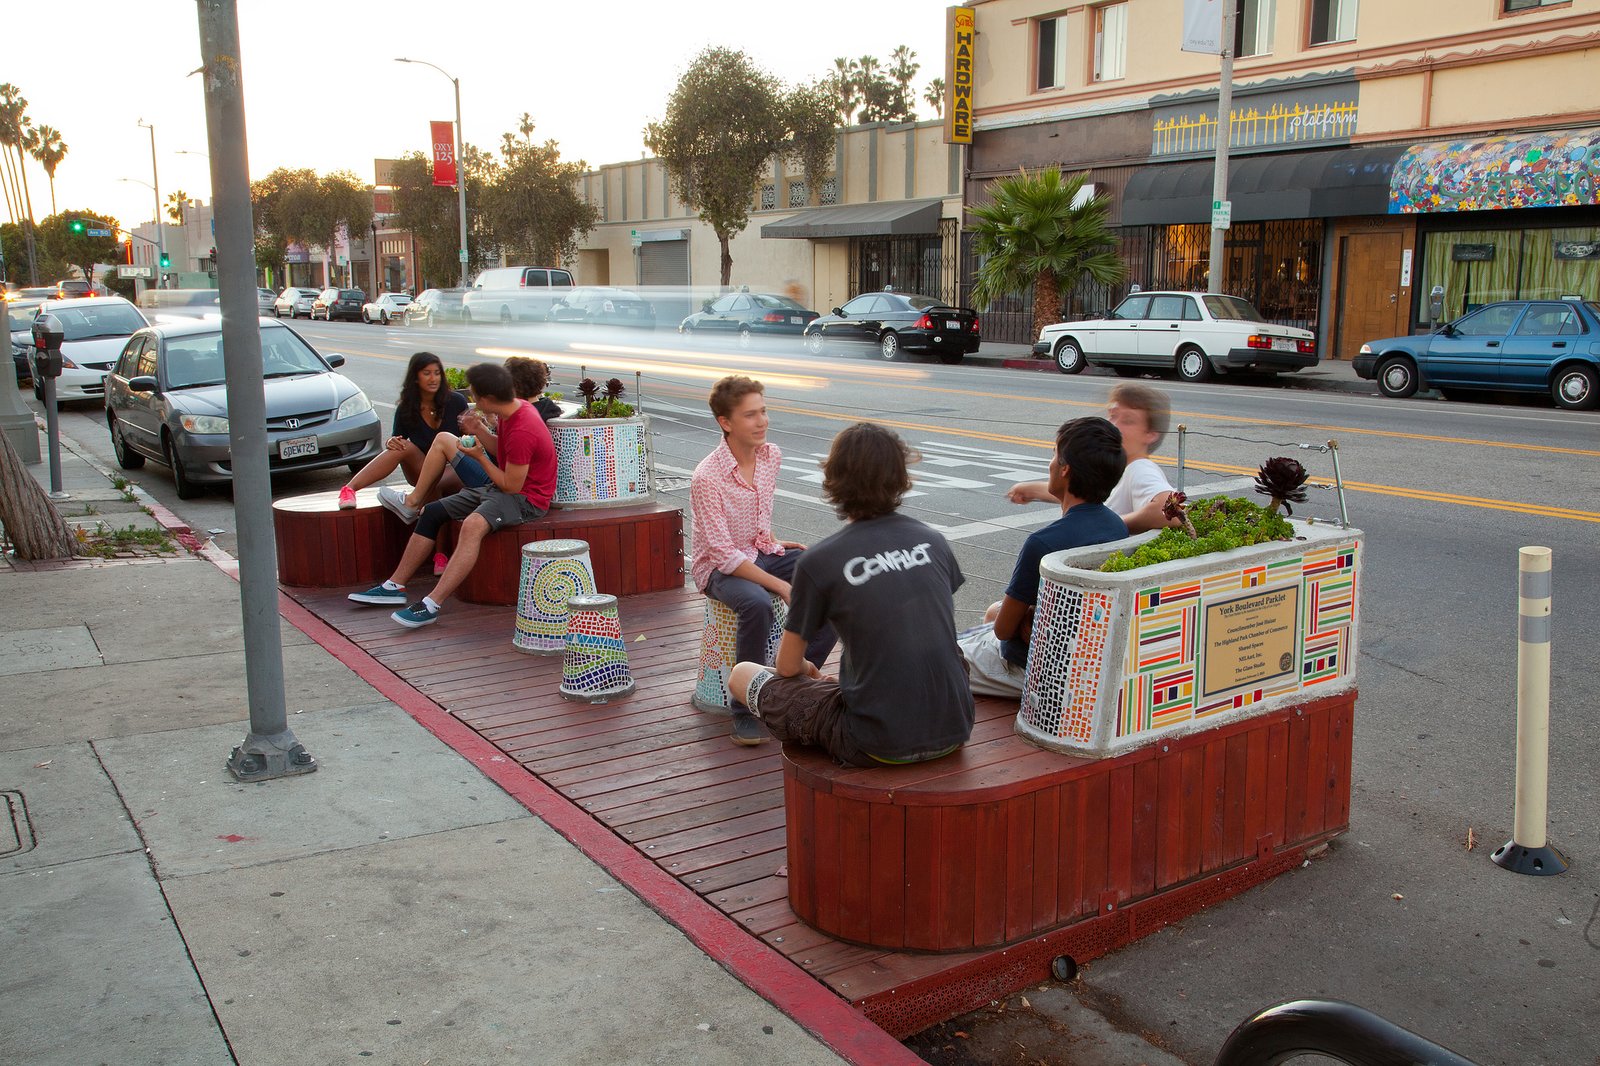 A parklet on York Blvd. in Highland Park. Photo from People St.